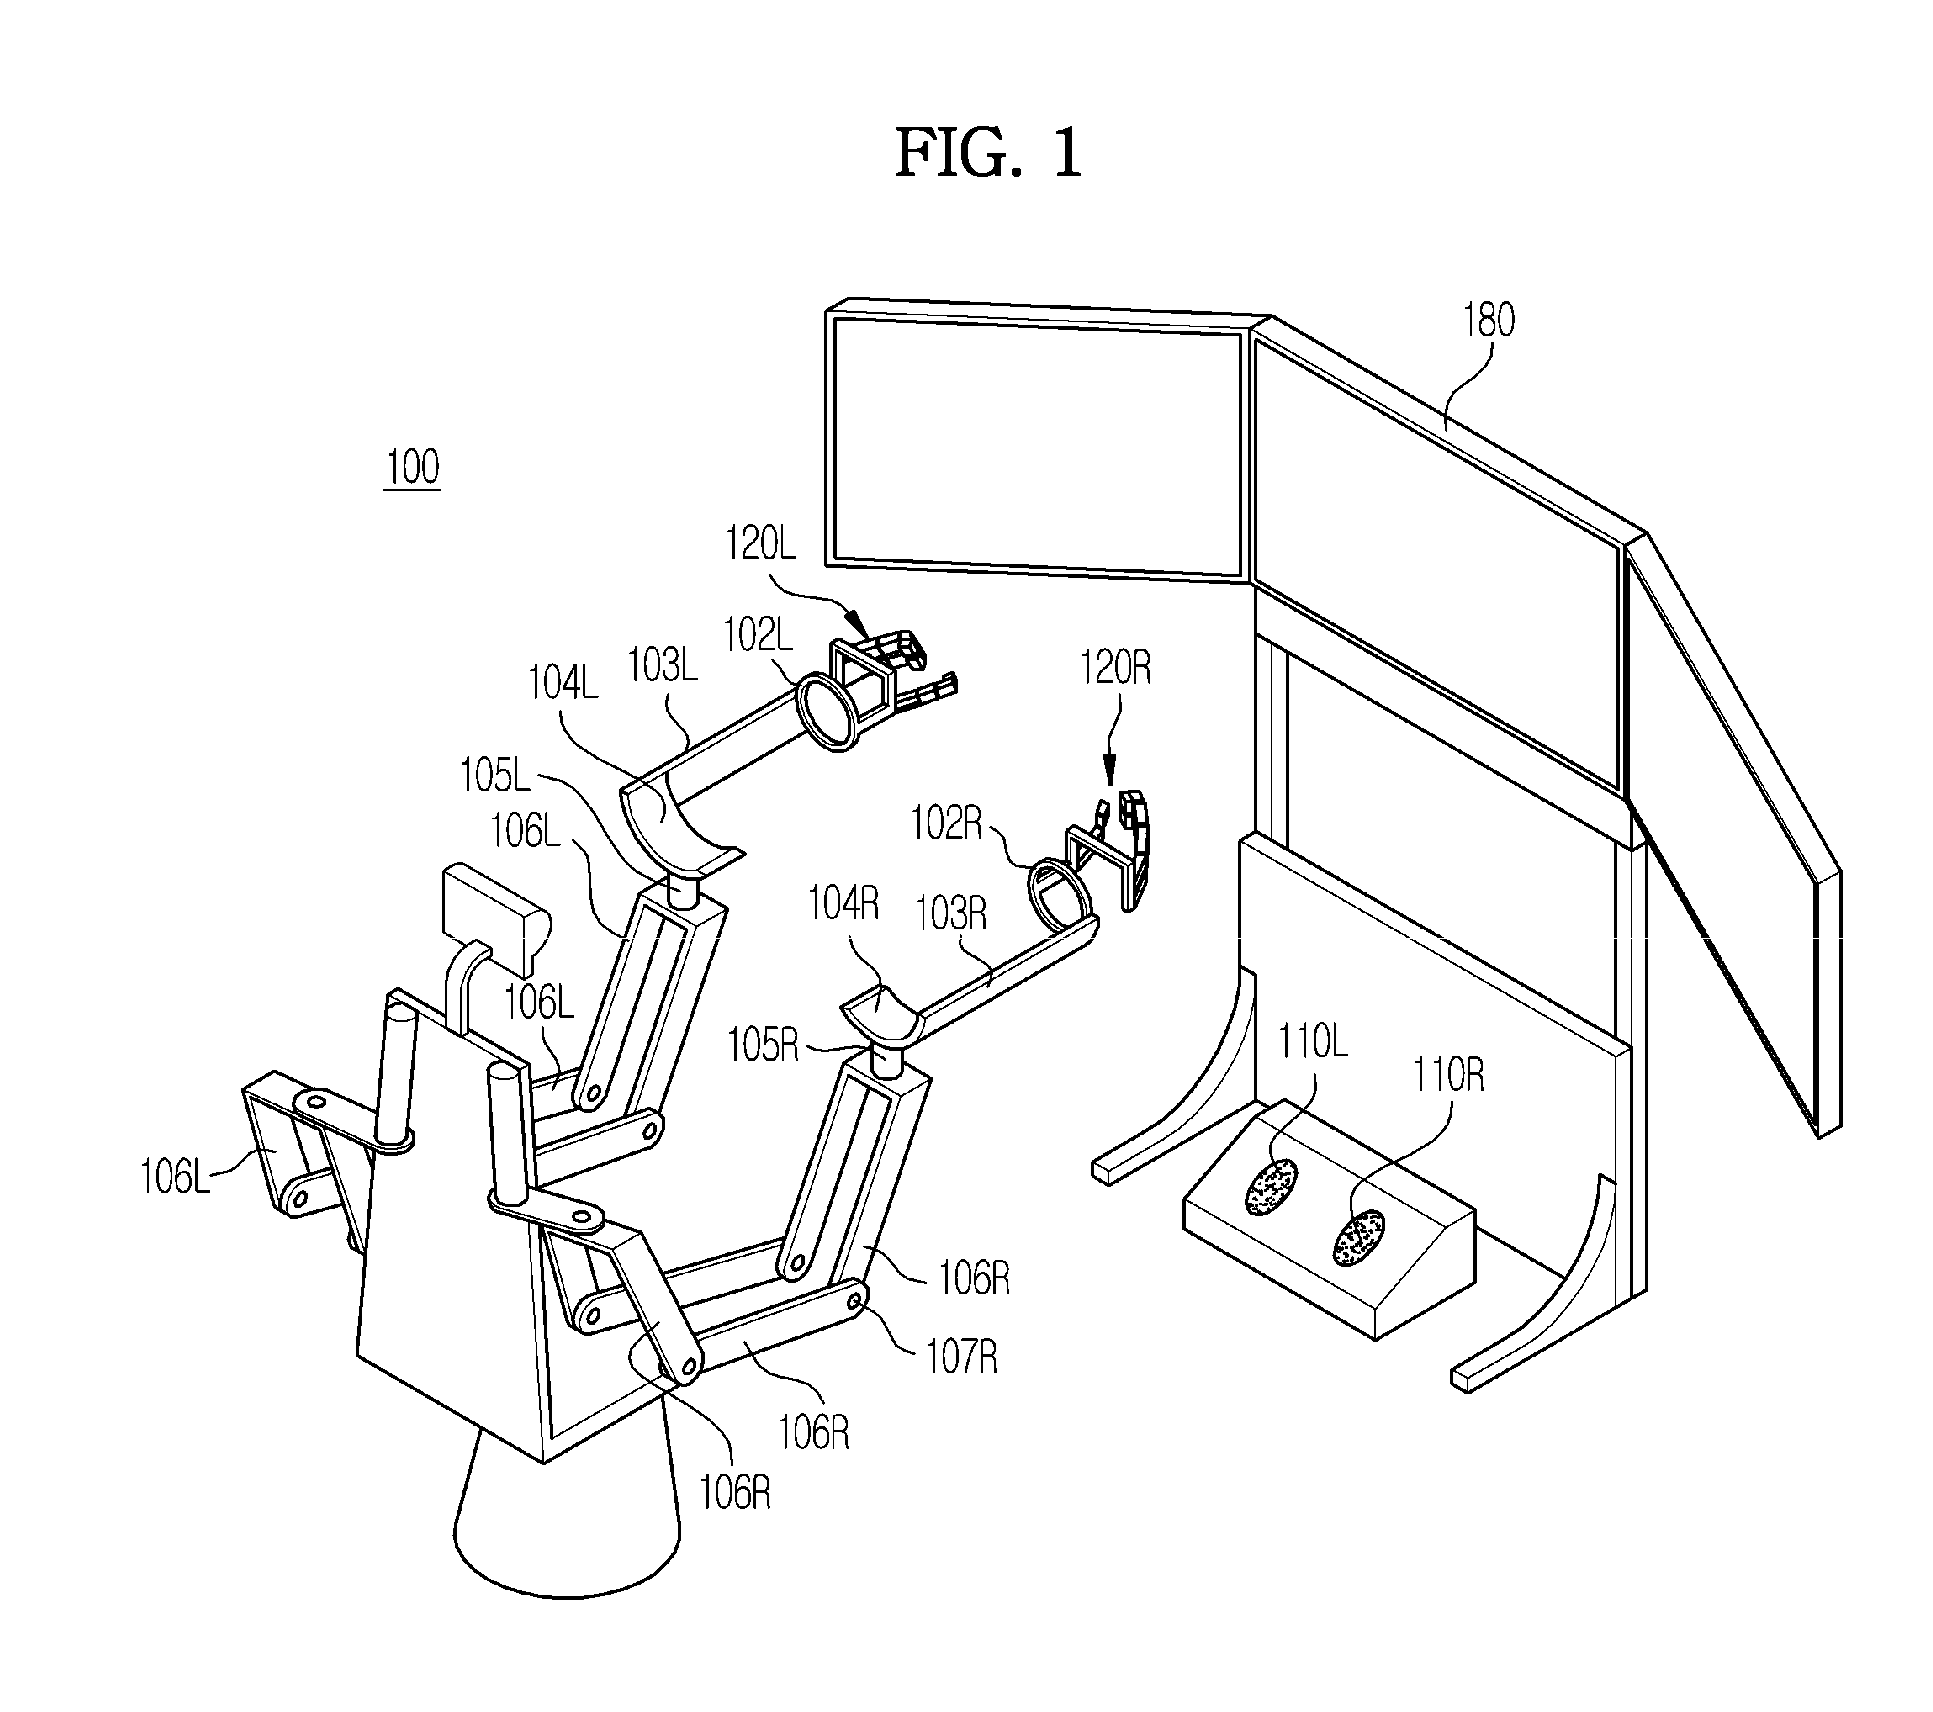 Surgical robot system and method of controlling the same